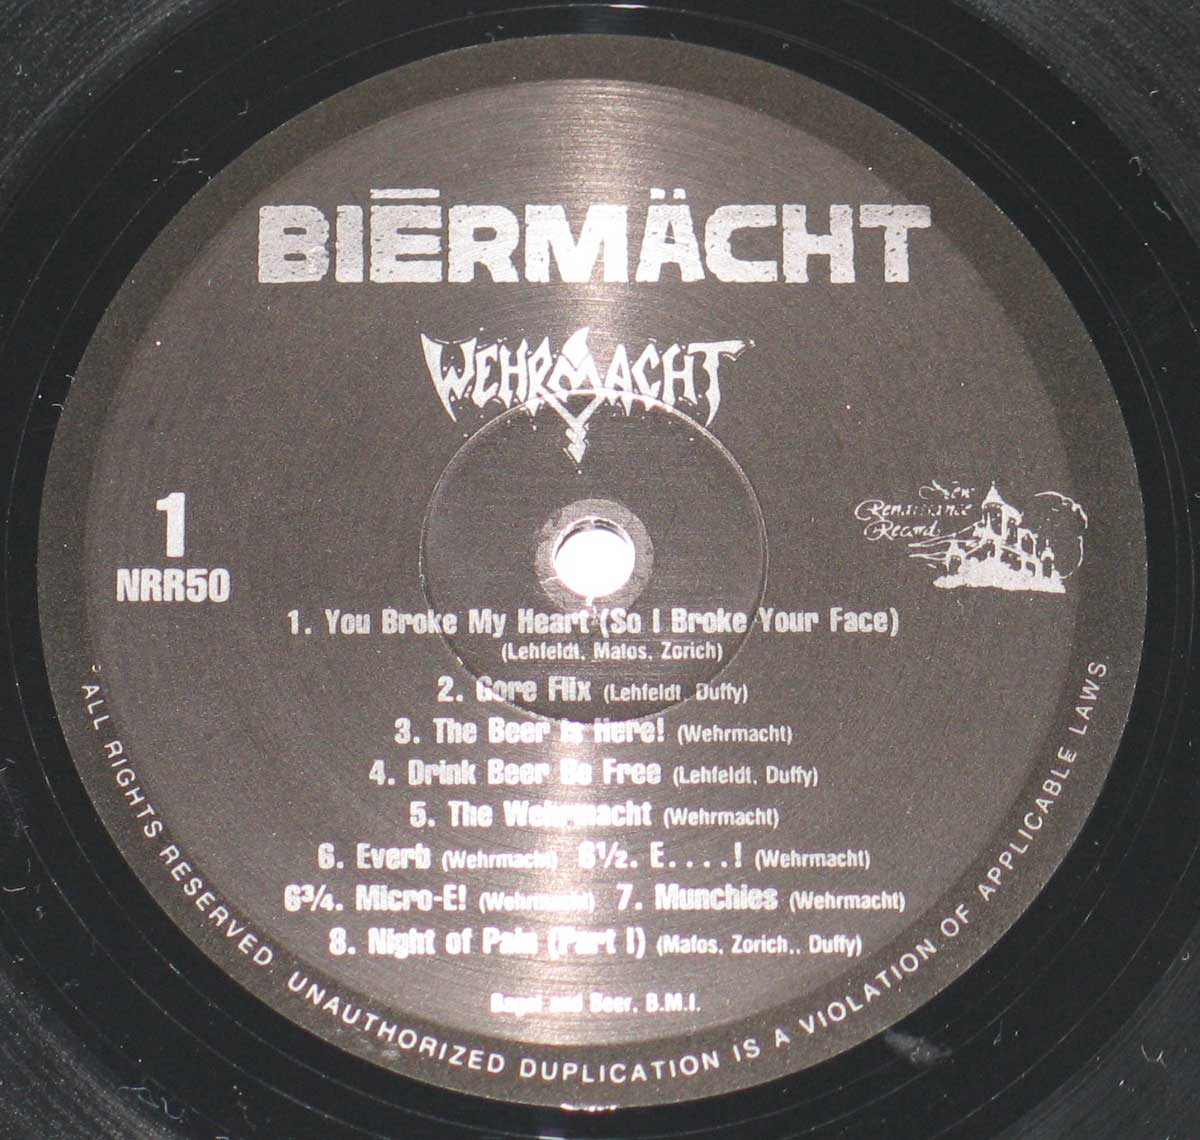 Close-up photo of the Black & White "New Renaissance Records" Record Label  